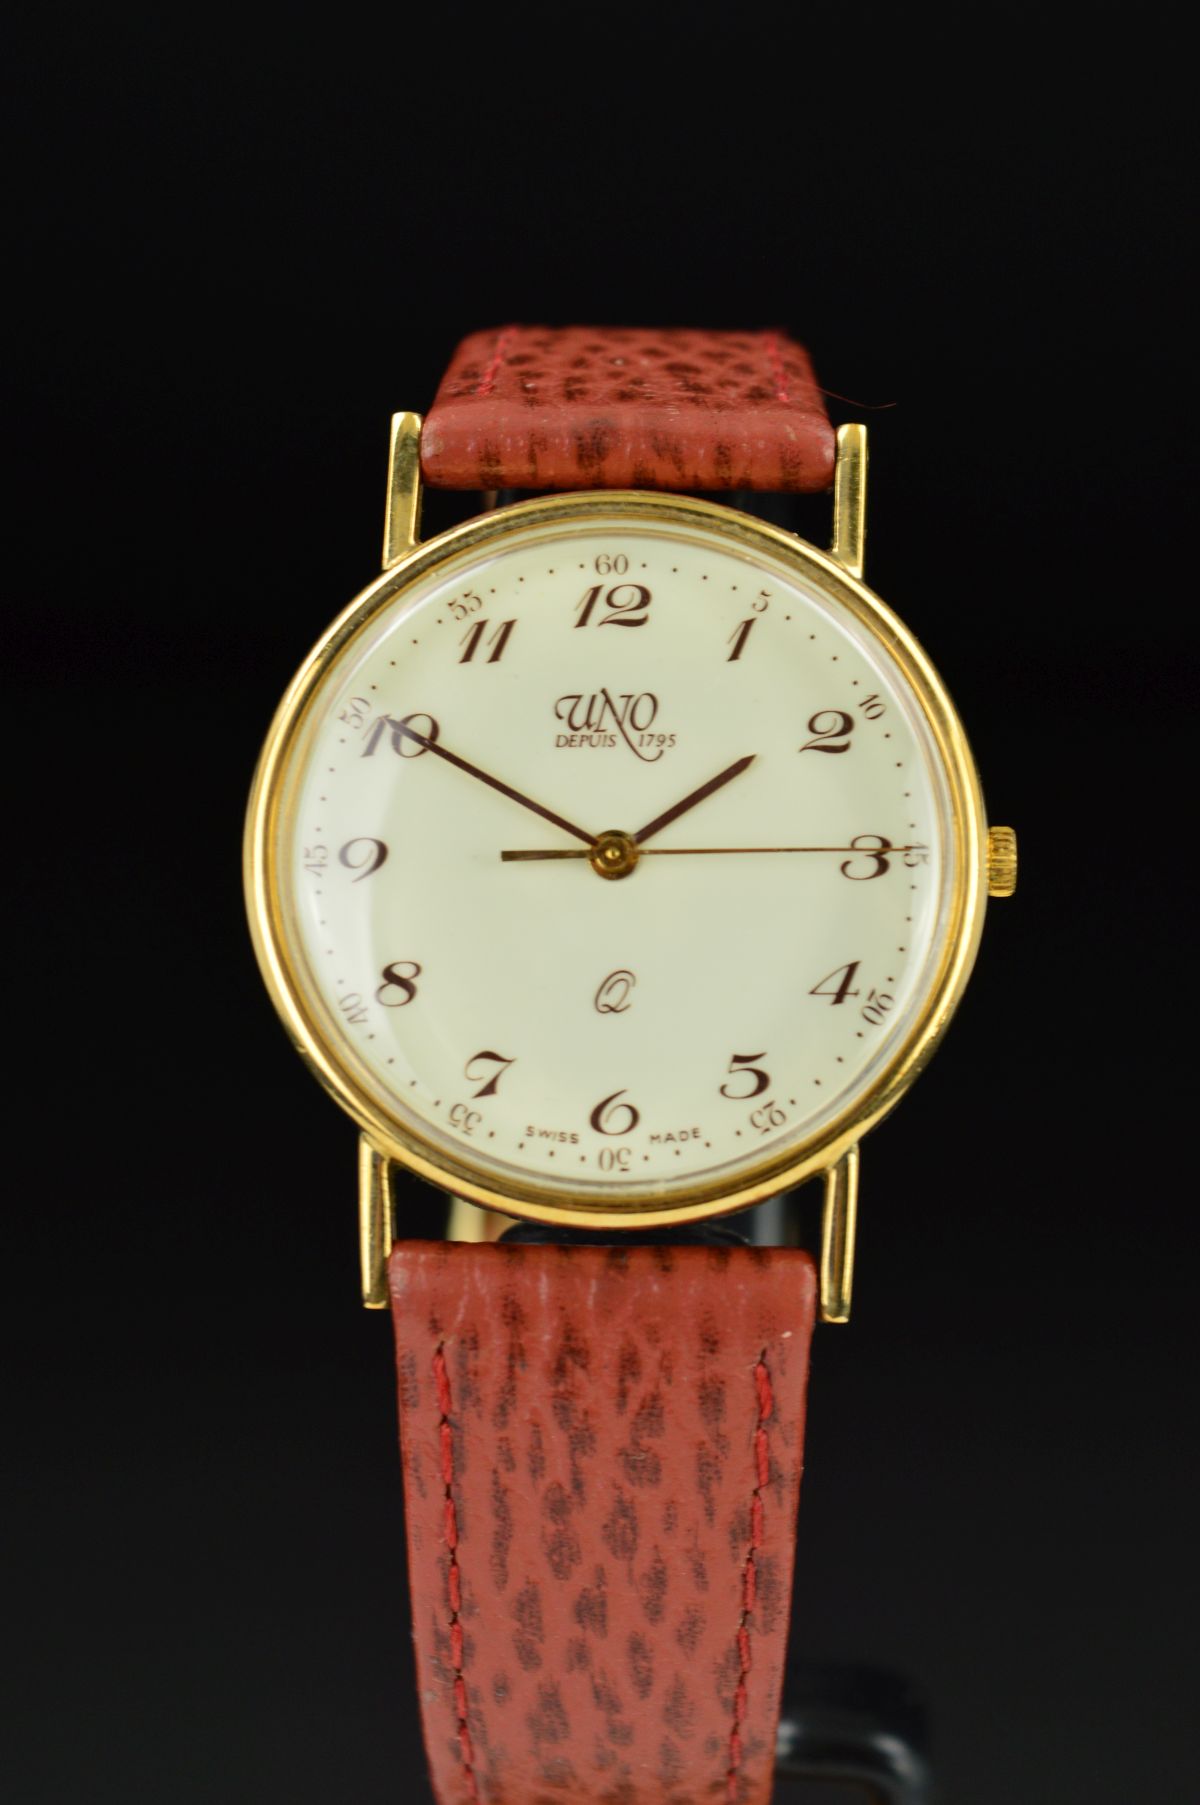 A MID TO LATE 20TH CENTURY 9CT GOLD GENT'S UNO WRISTWATCH, cream dial with Arabic numerals, Quartz - Image 2 of 10